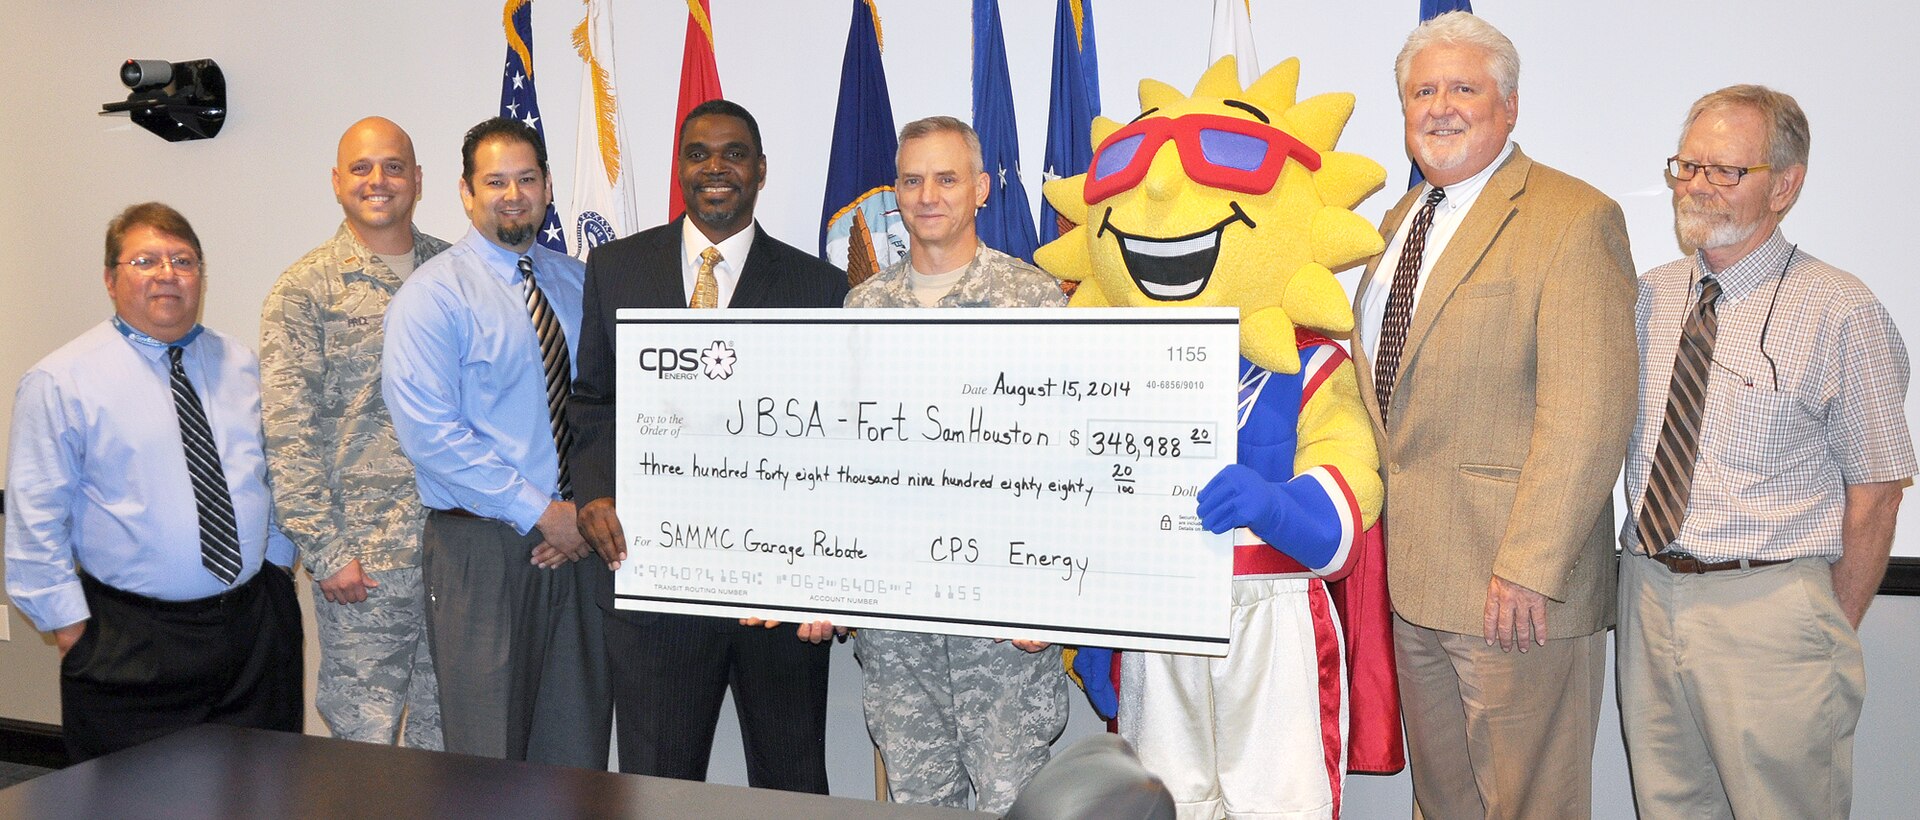 A $348,988 rebate check was presented at the 502nd Air Base Wing headquarters Aug. 15, thanks to a service contract between Joint Base San Antonio and the San Antonio utility company CPS Energy to upgrade lighting at the San Antonio Military Medical Center garage. Pictured at the rebate check presentation were (from left) Andy Hinojosa, JBSA energy manager; 2nd Lt. Christopher Price, 502nd Contracting Squadron; Alfred Canales, 502nd Civil Engineer Squadron engineer; Garrick Williams, JBSA Energy Solutions director with CPS Energy; Col. Jim Chevallier, 502nd ABW and JBSA deputy commander; “Ray” the CPS Energy mascot; Frank Thomas, Joint Base San Antonio resource efficiency manager; and Jerry McCall, JBSA-Fort Sam Houston energy manager.(Photo by Steve Elliott)